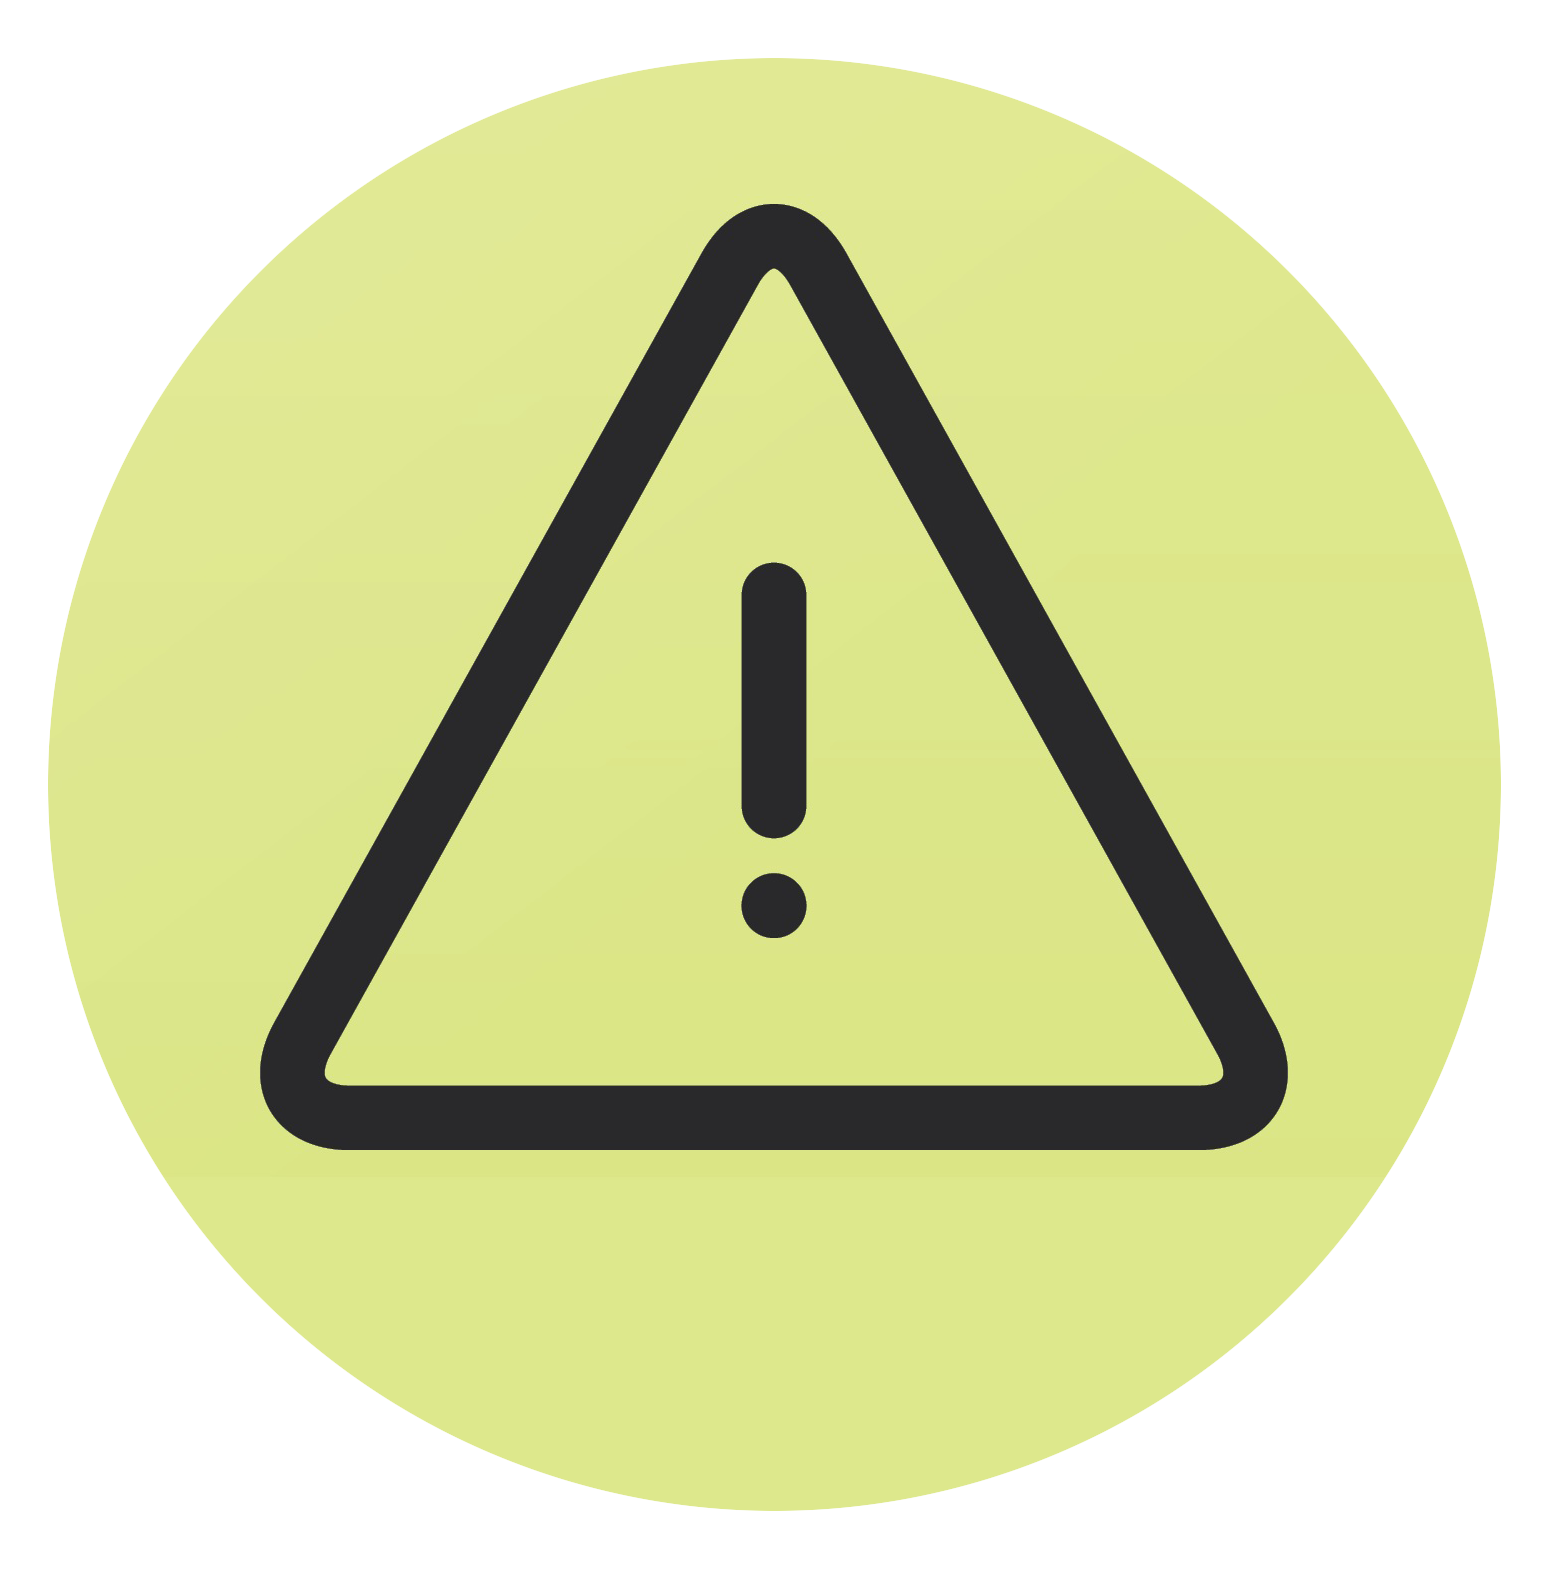 Hazard icon - black outline with a green background